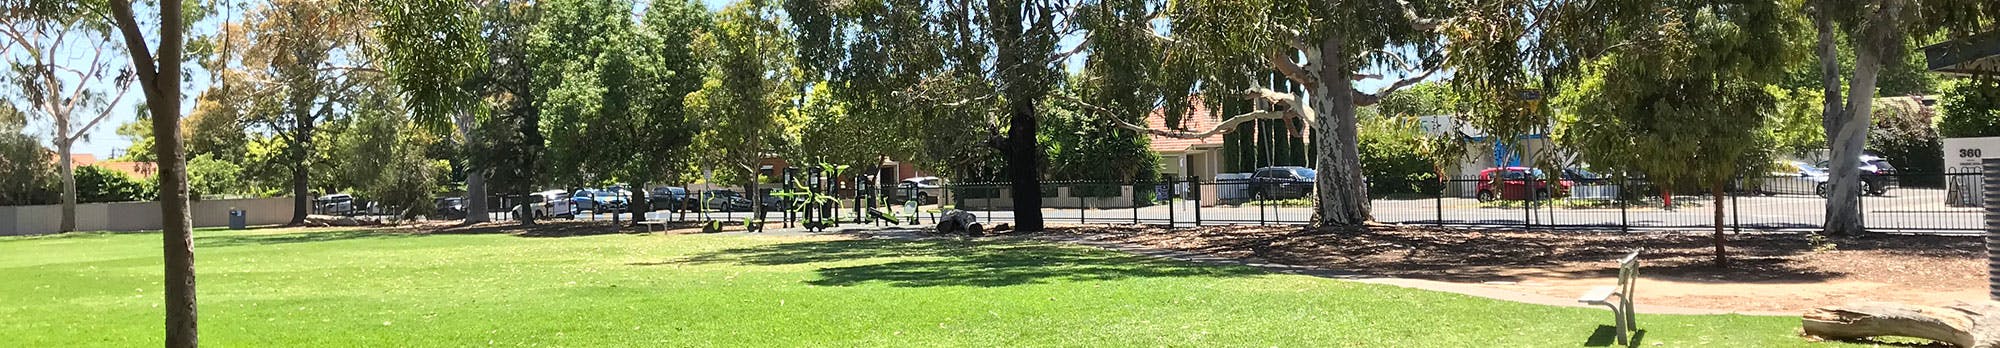 open green space at Page Park, trees and side fencing